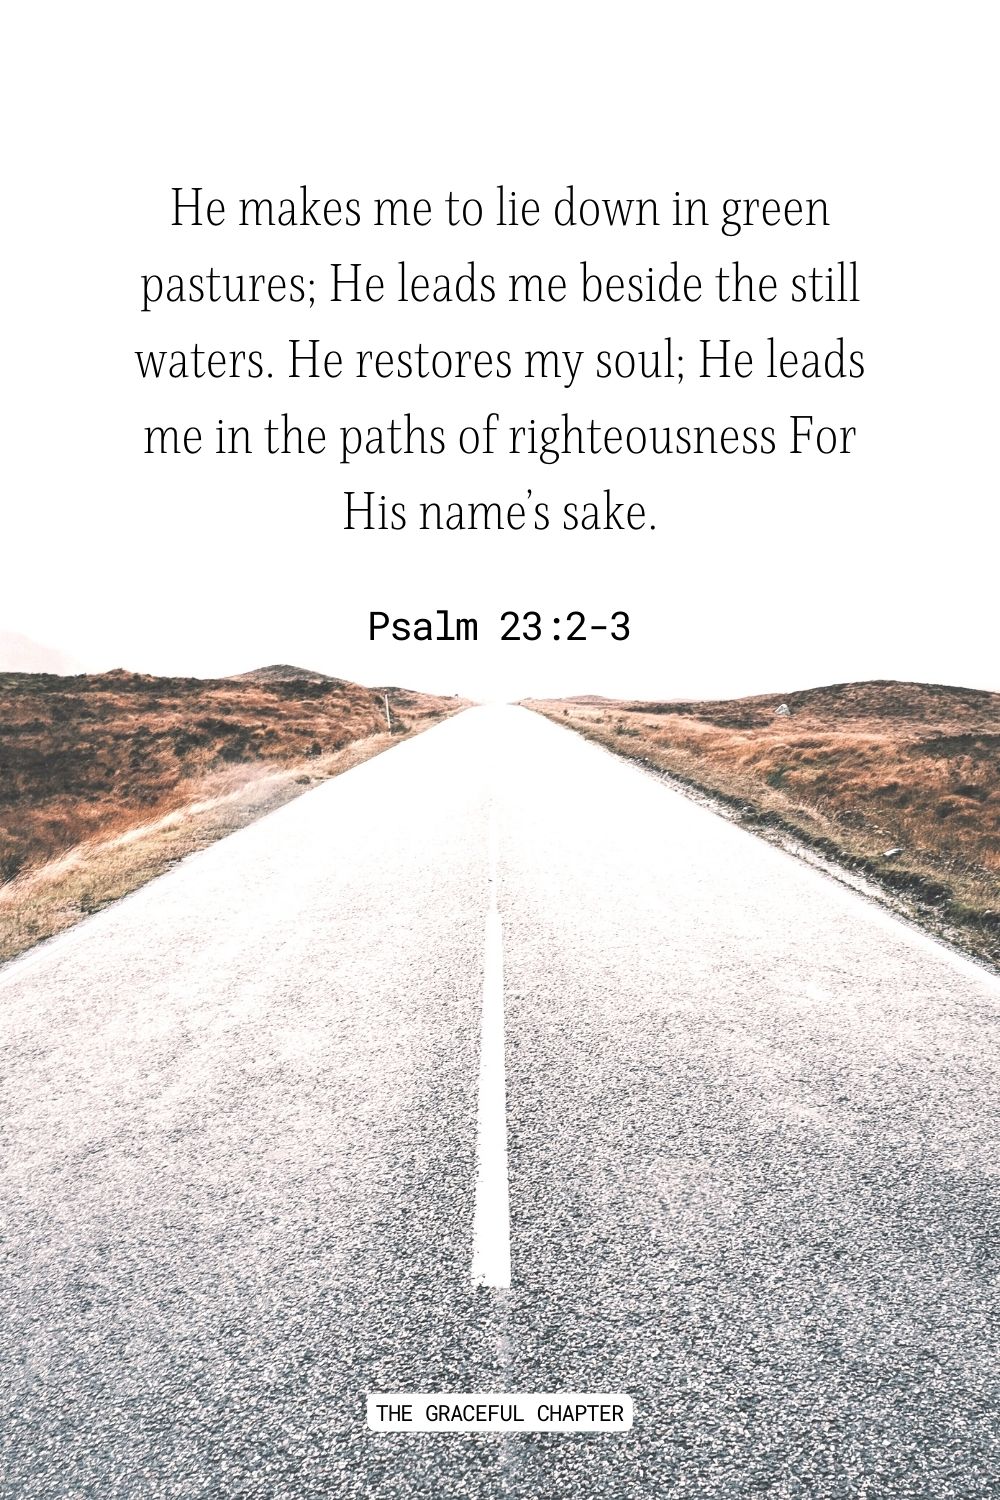 He makes me to lie down in green pastures; He leads me beside the still waters. He restores my soul; He leads me in the paths of righteousness For His name’s sake. Psalm 23:2-3